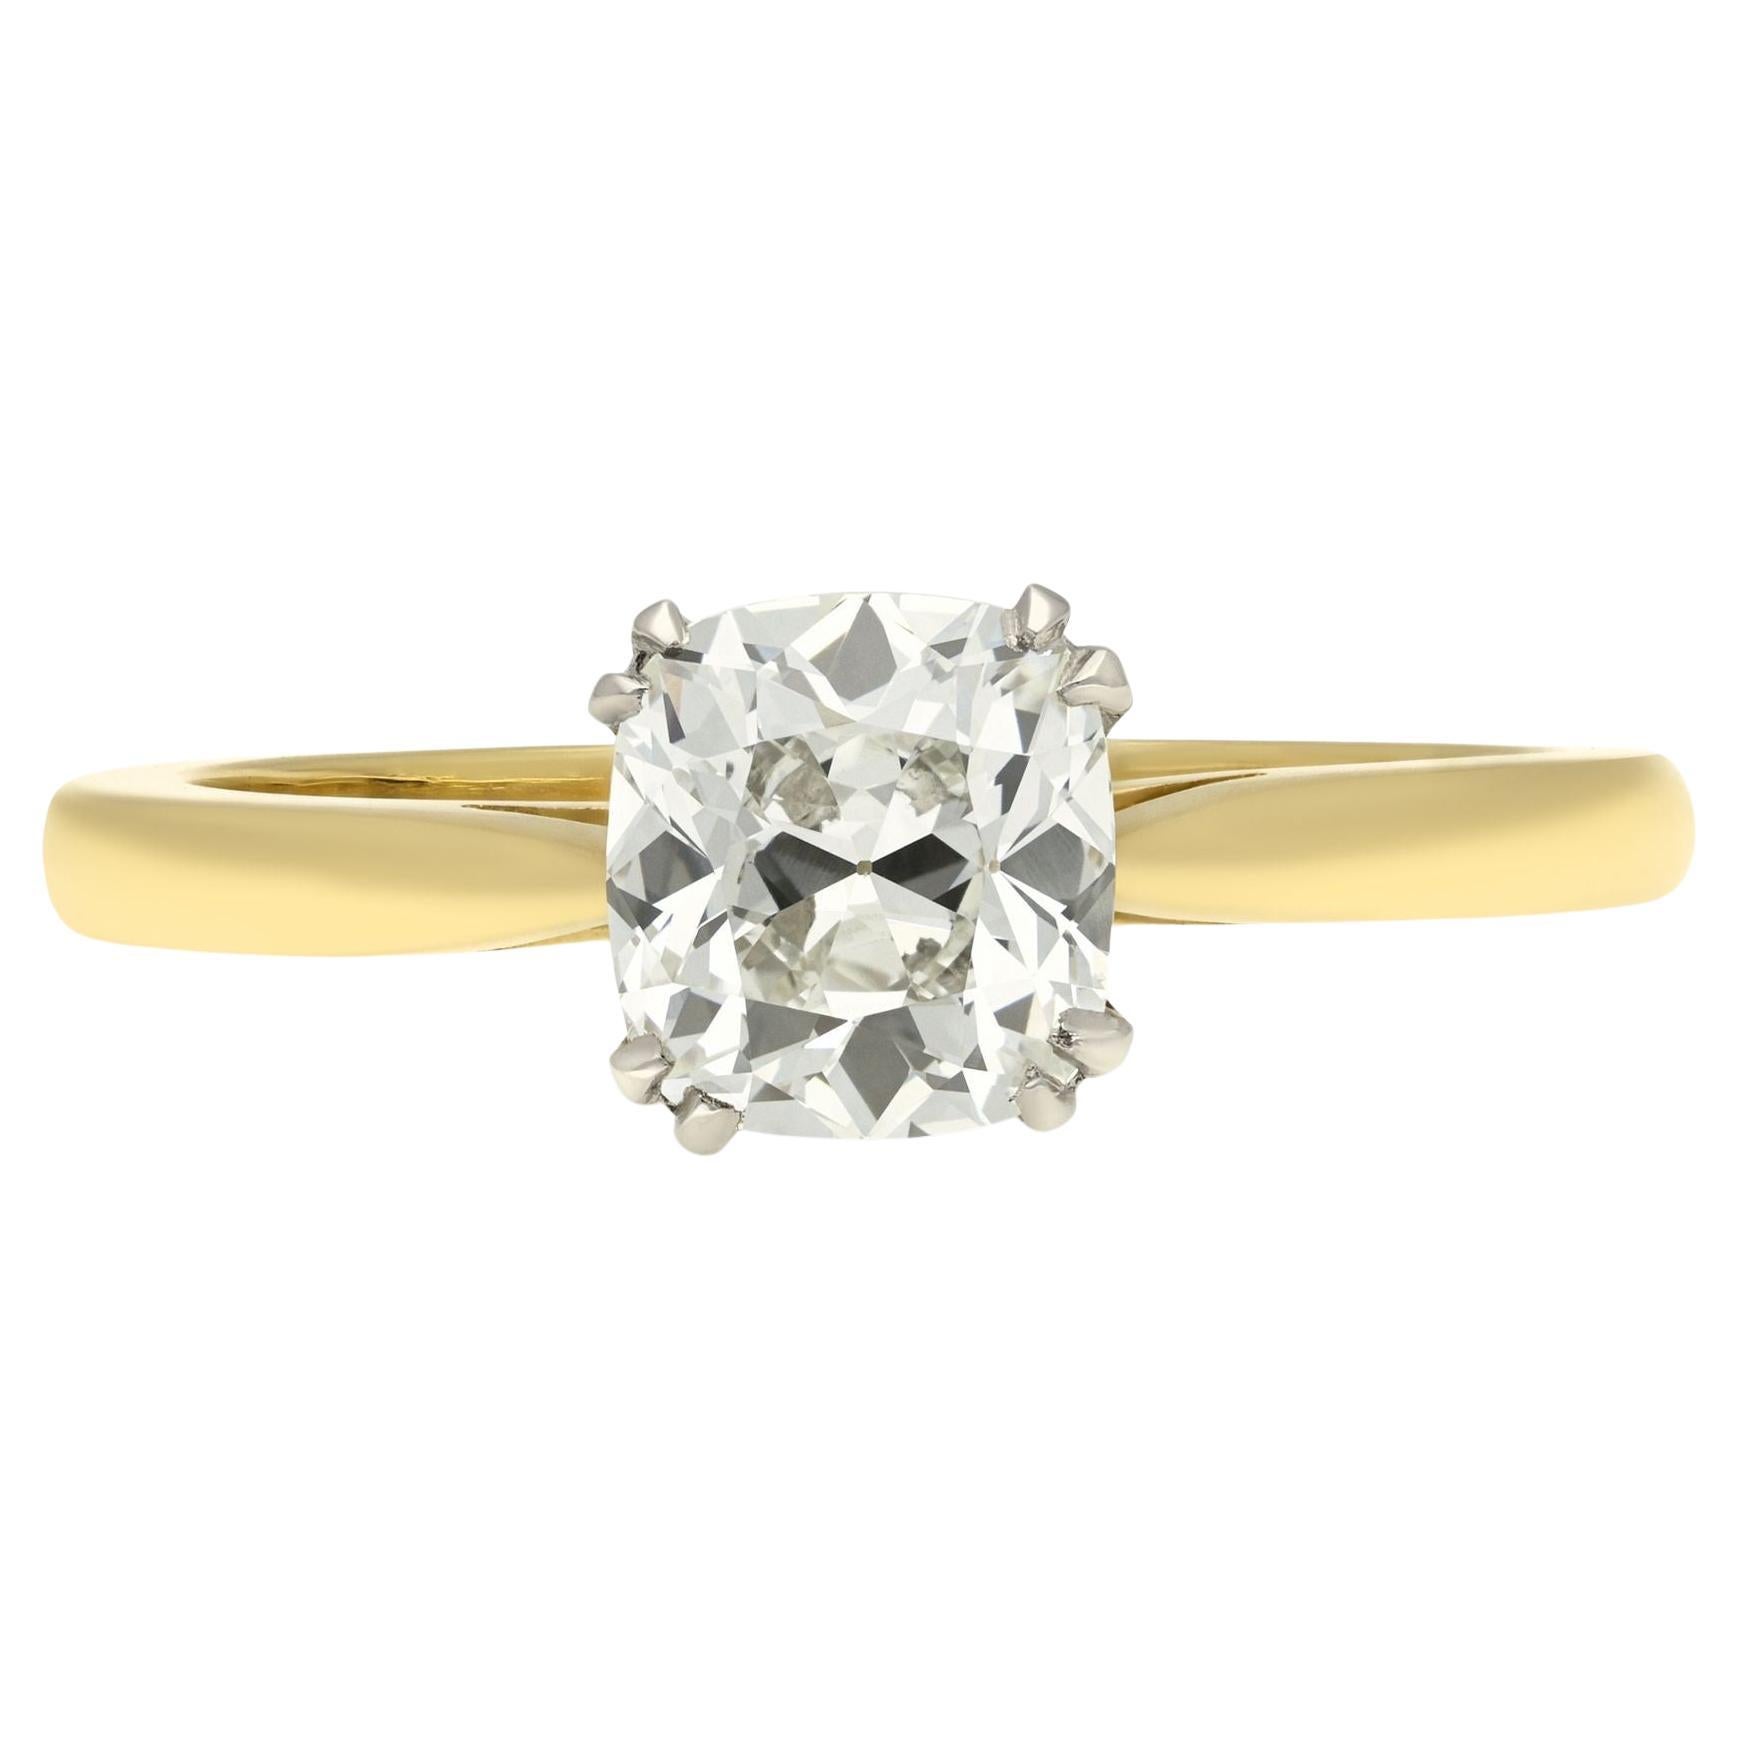 Hancocks 1.12ct Old Mine Cushion Cut Diamond And 18ct Yellow Gold Solitaire Ring For Sale